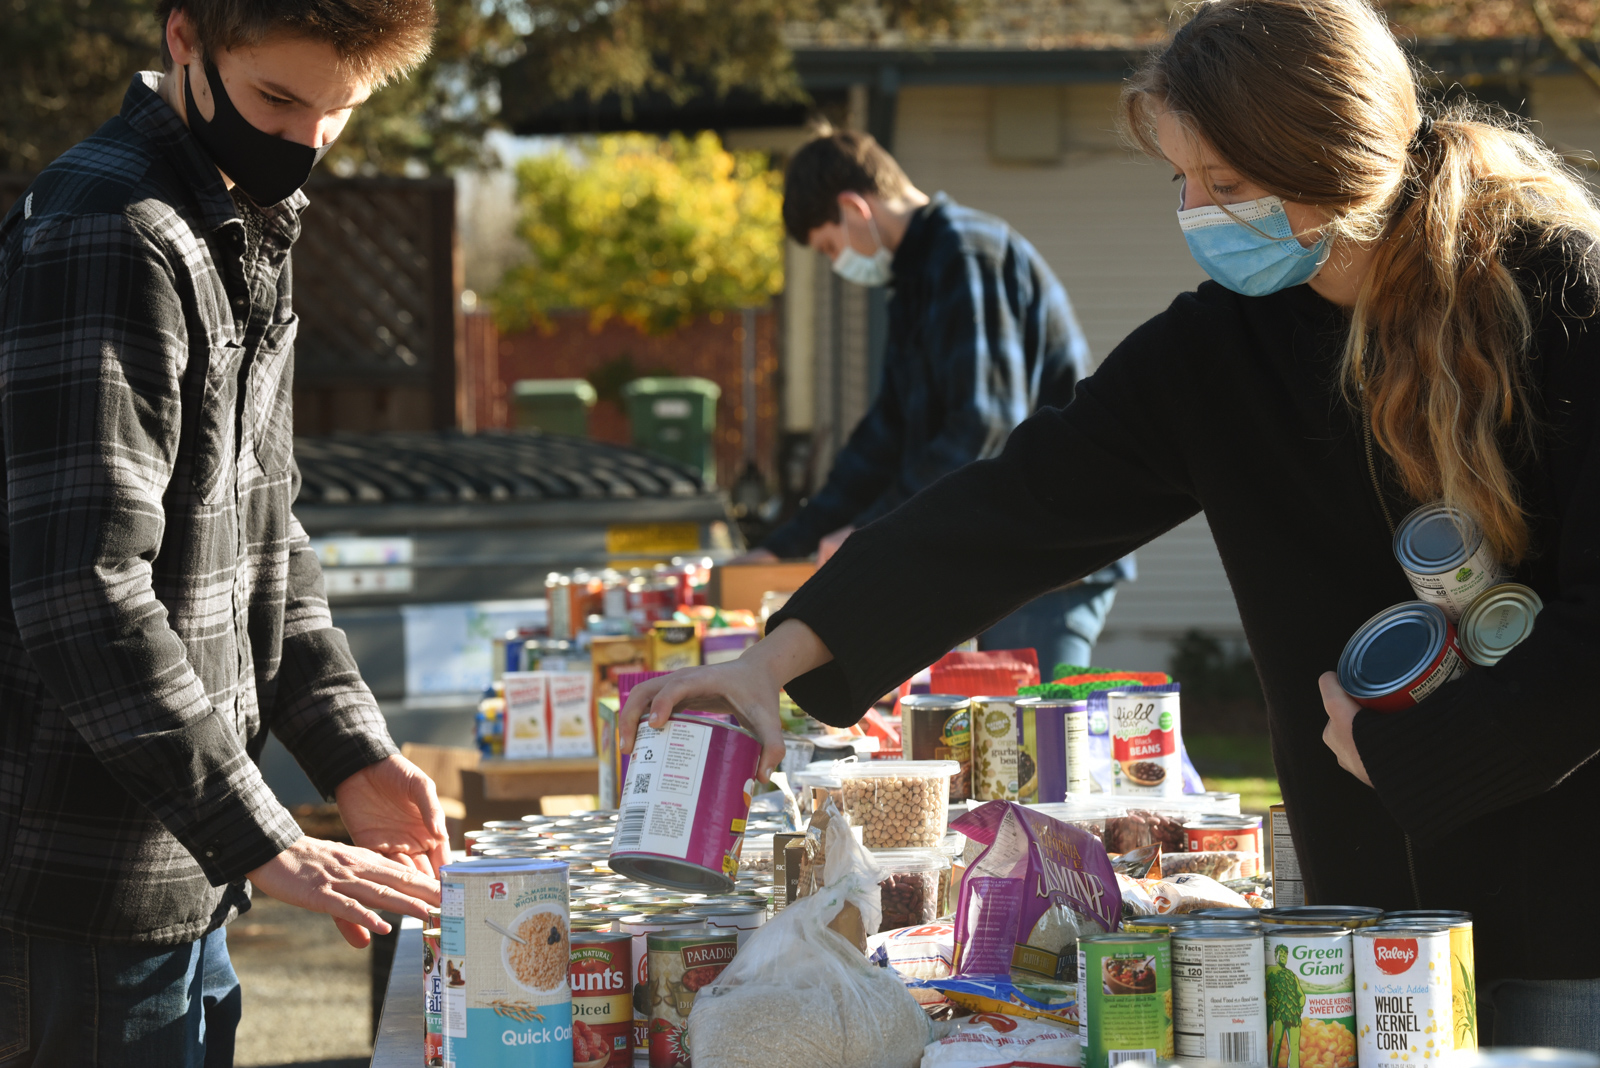 Volunteers for California Homemakers Association placing canned food items on a table.